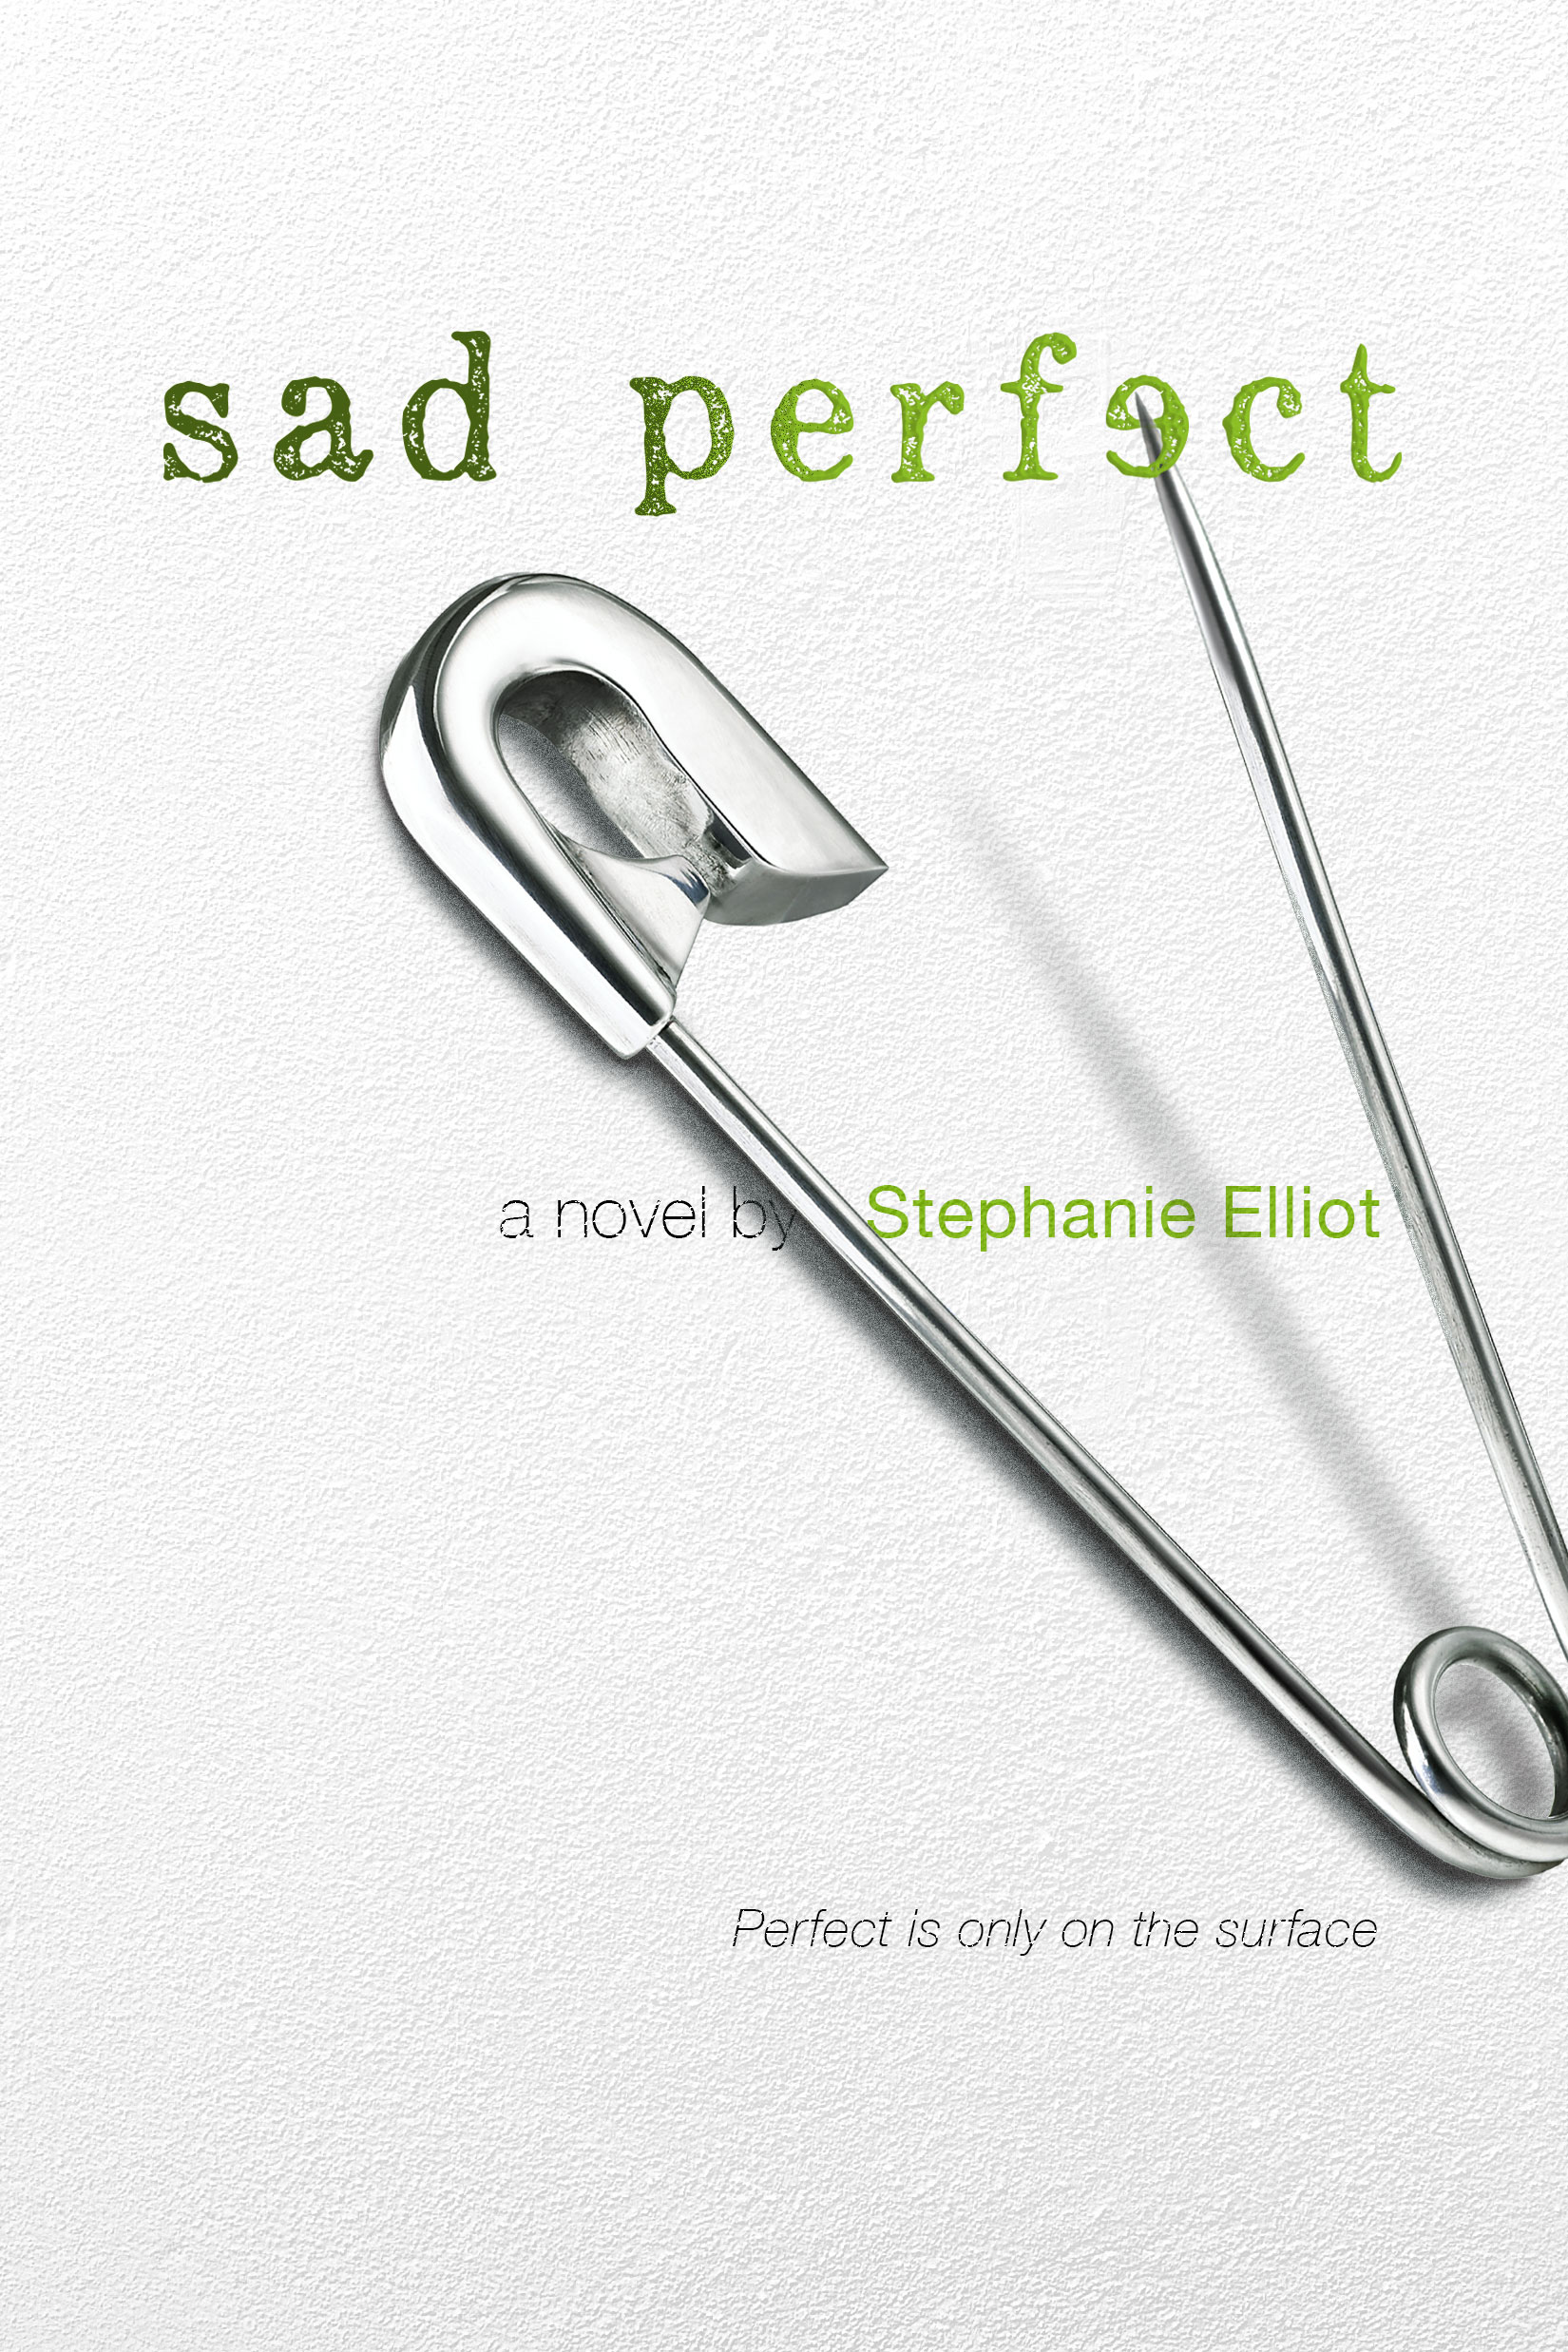 Stephanie Elliot Writing Eating Disorders And The Meaning Behind Sad Perfect